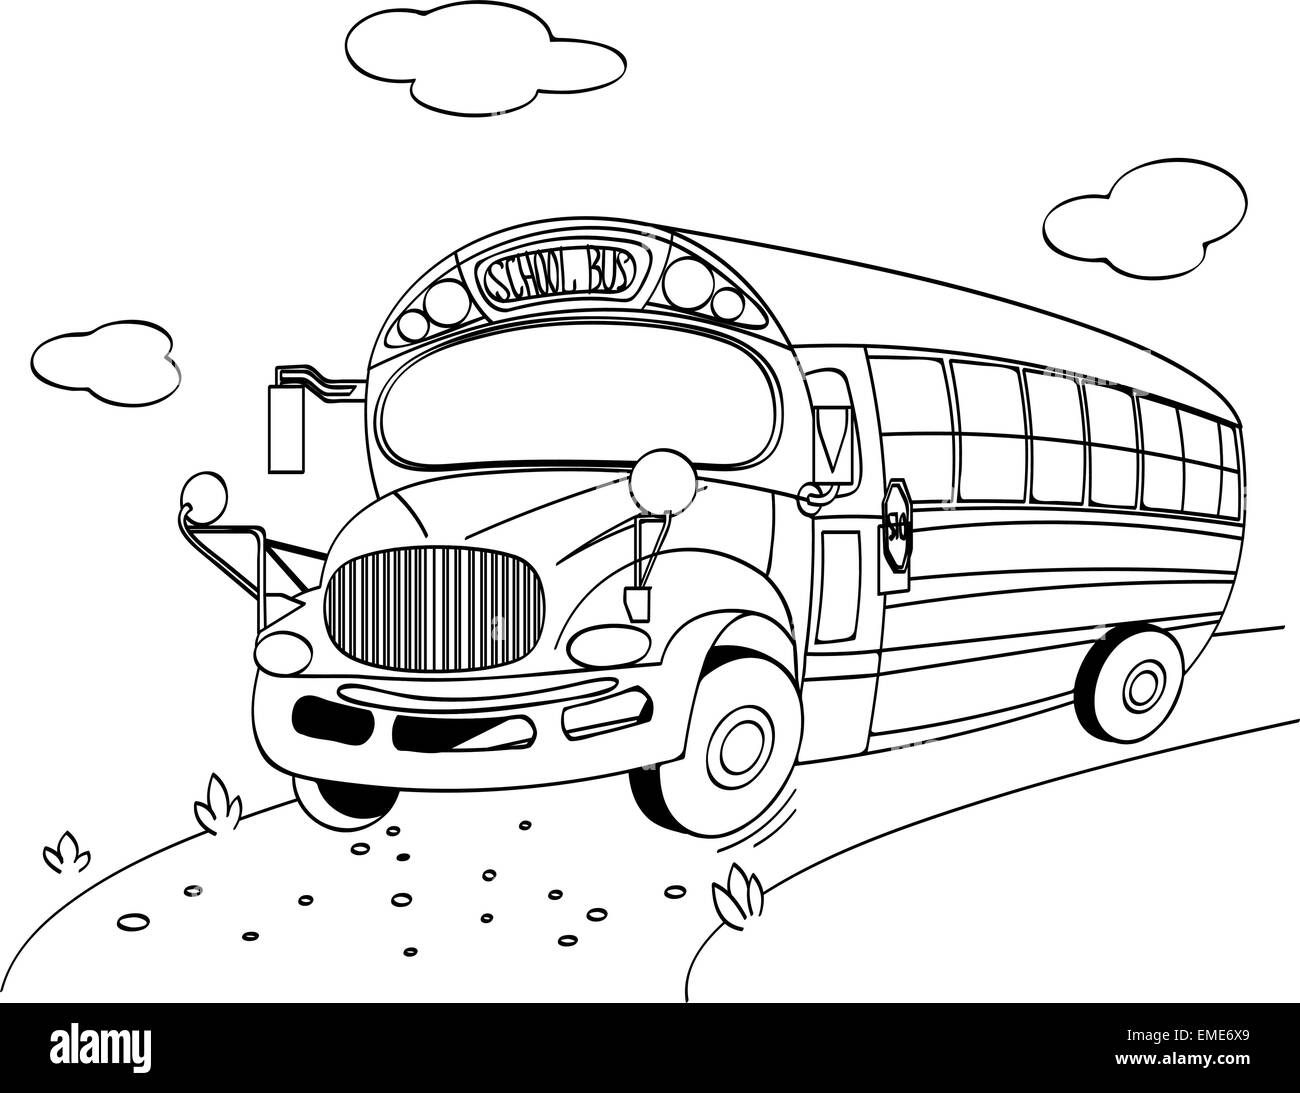 School bus black and white stock photos images